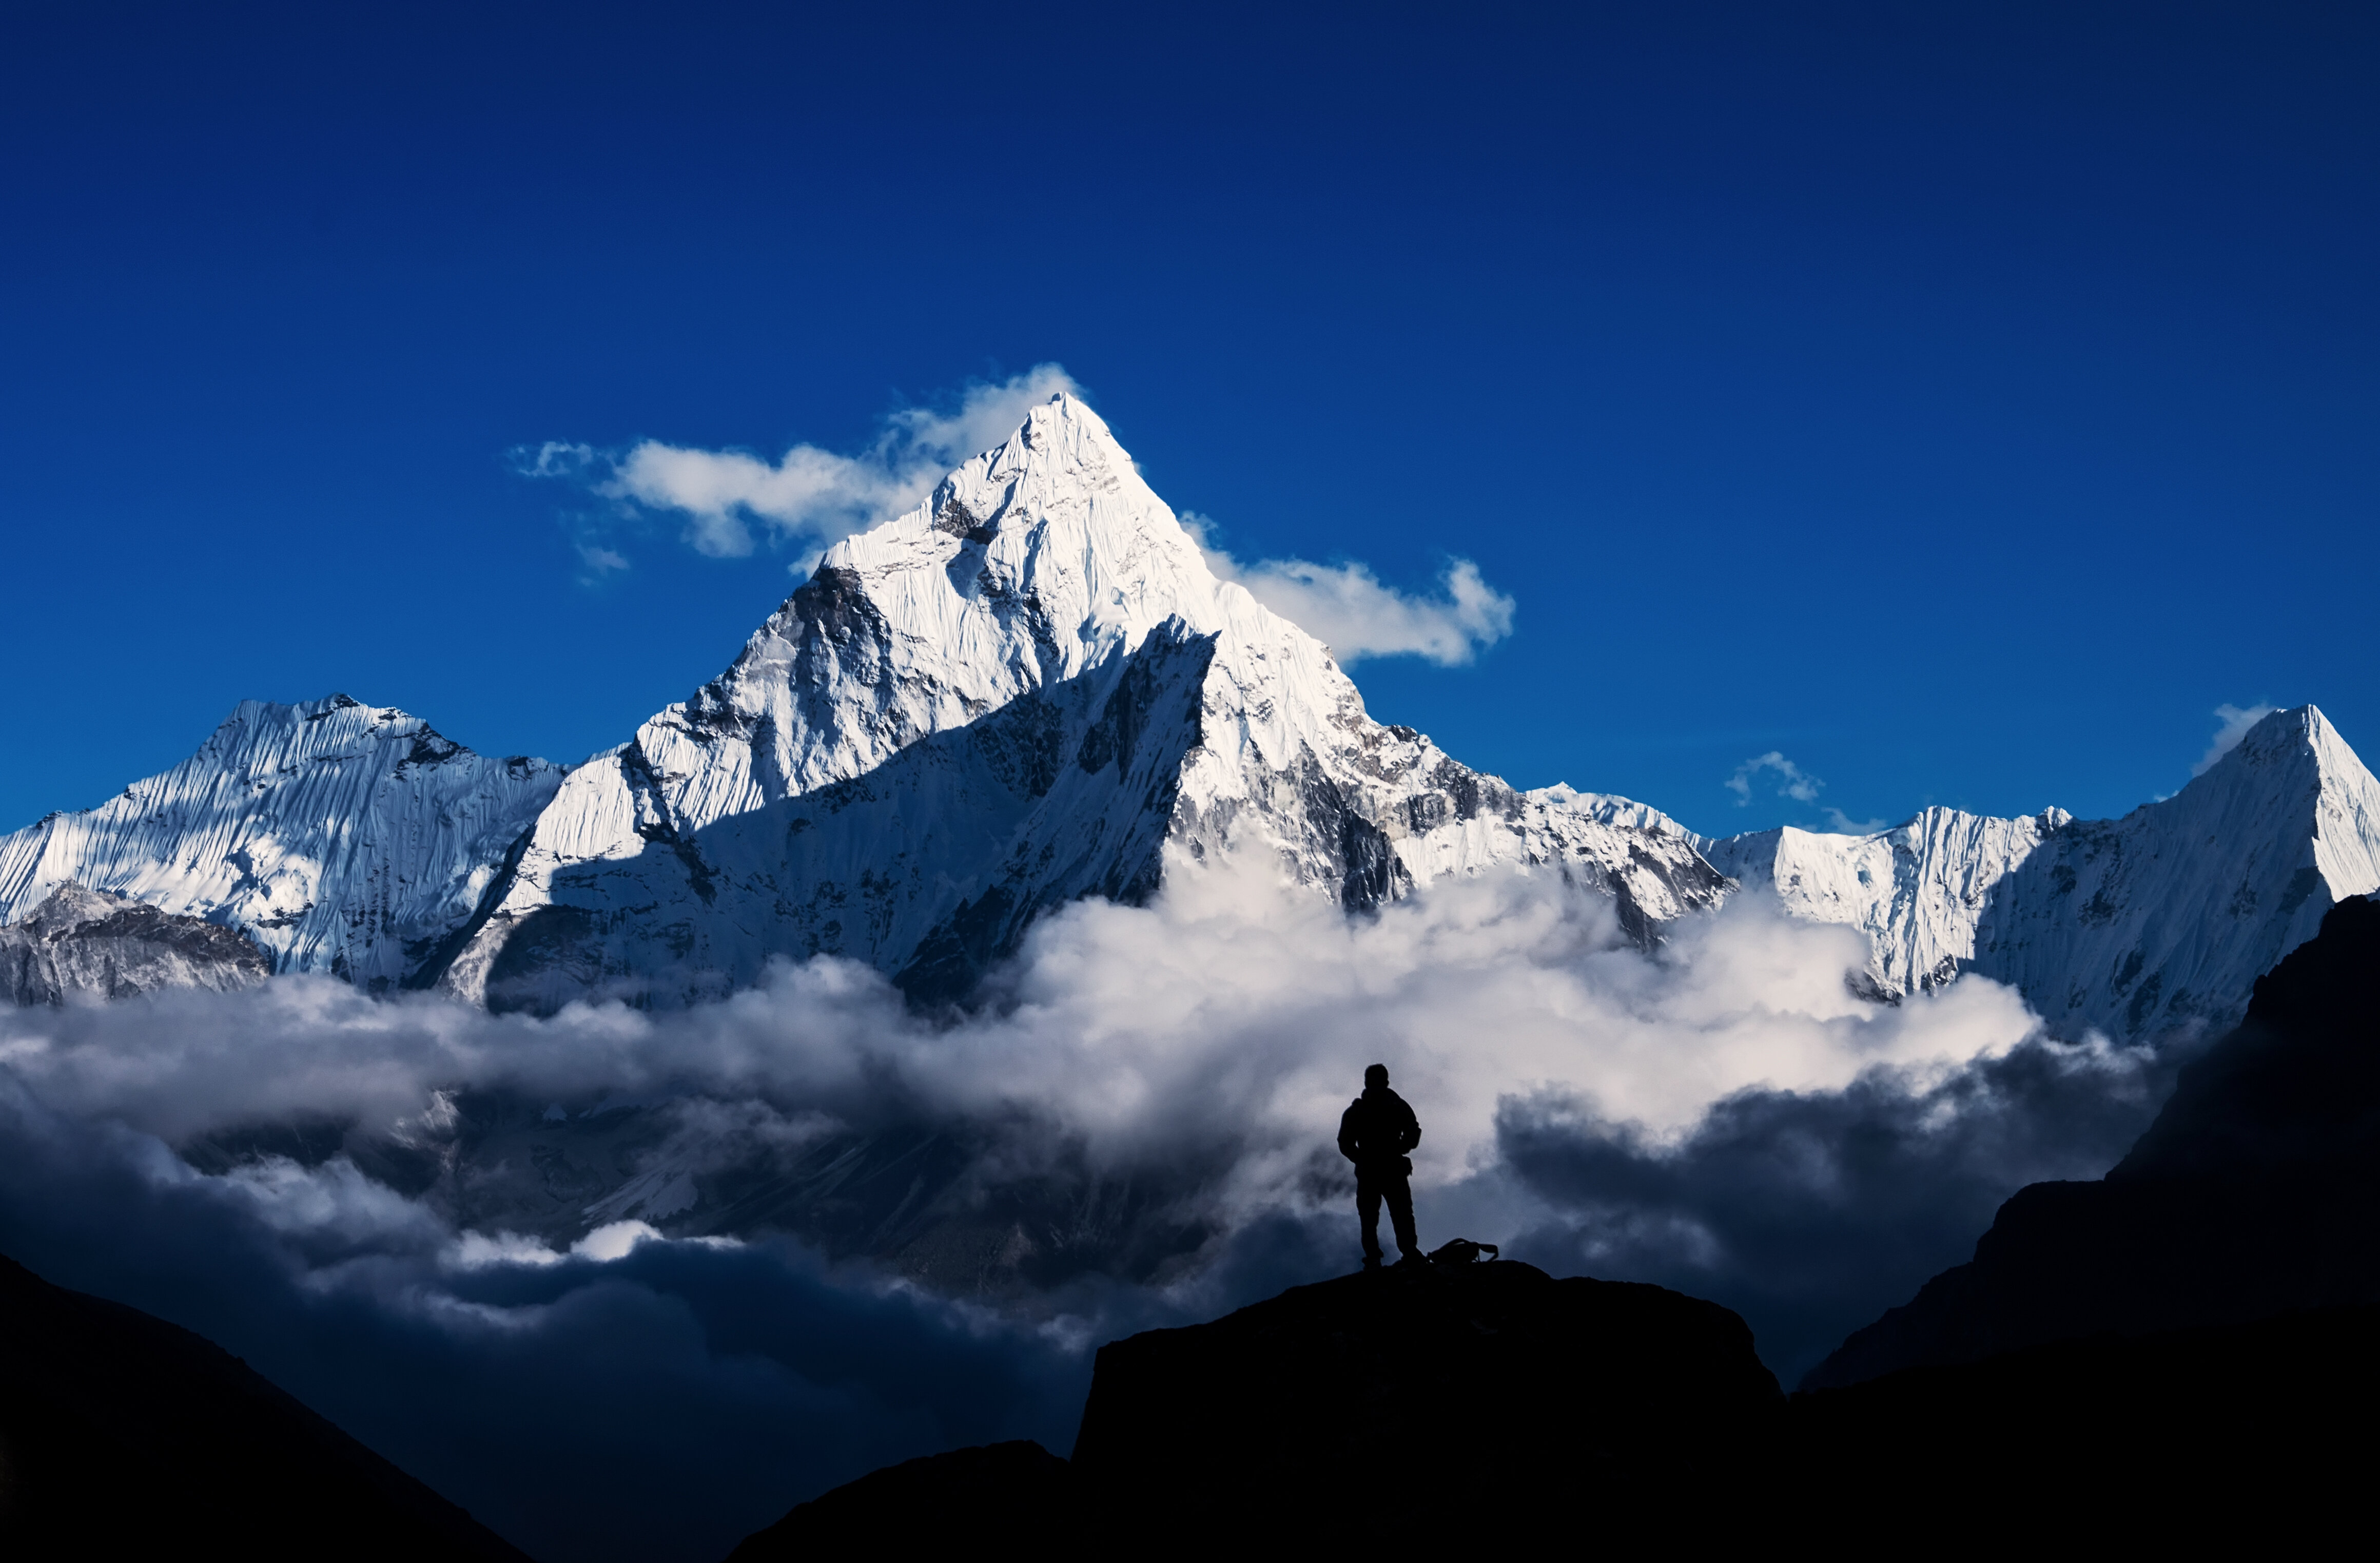 Man-hiking-silhouette-in-Mount-Everest,Himalayan-618202000 4638x3045